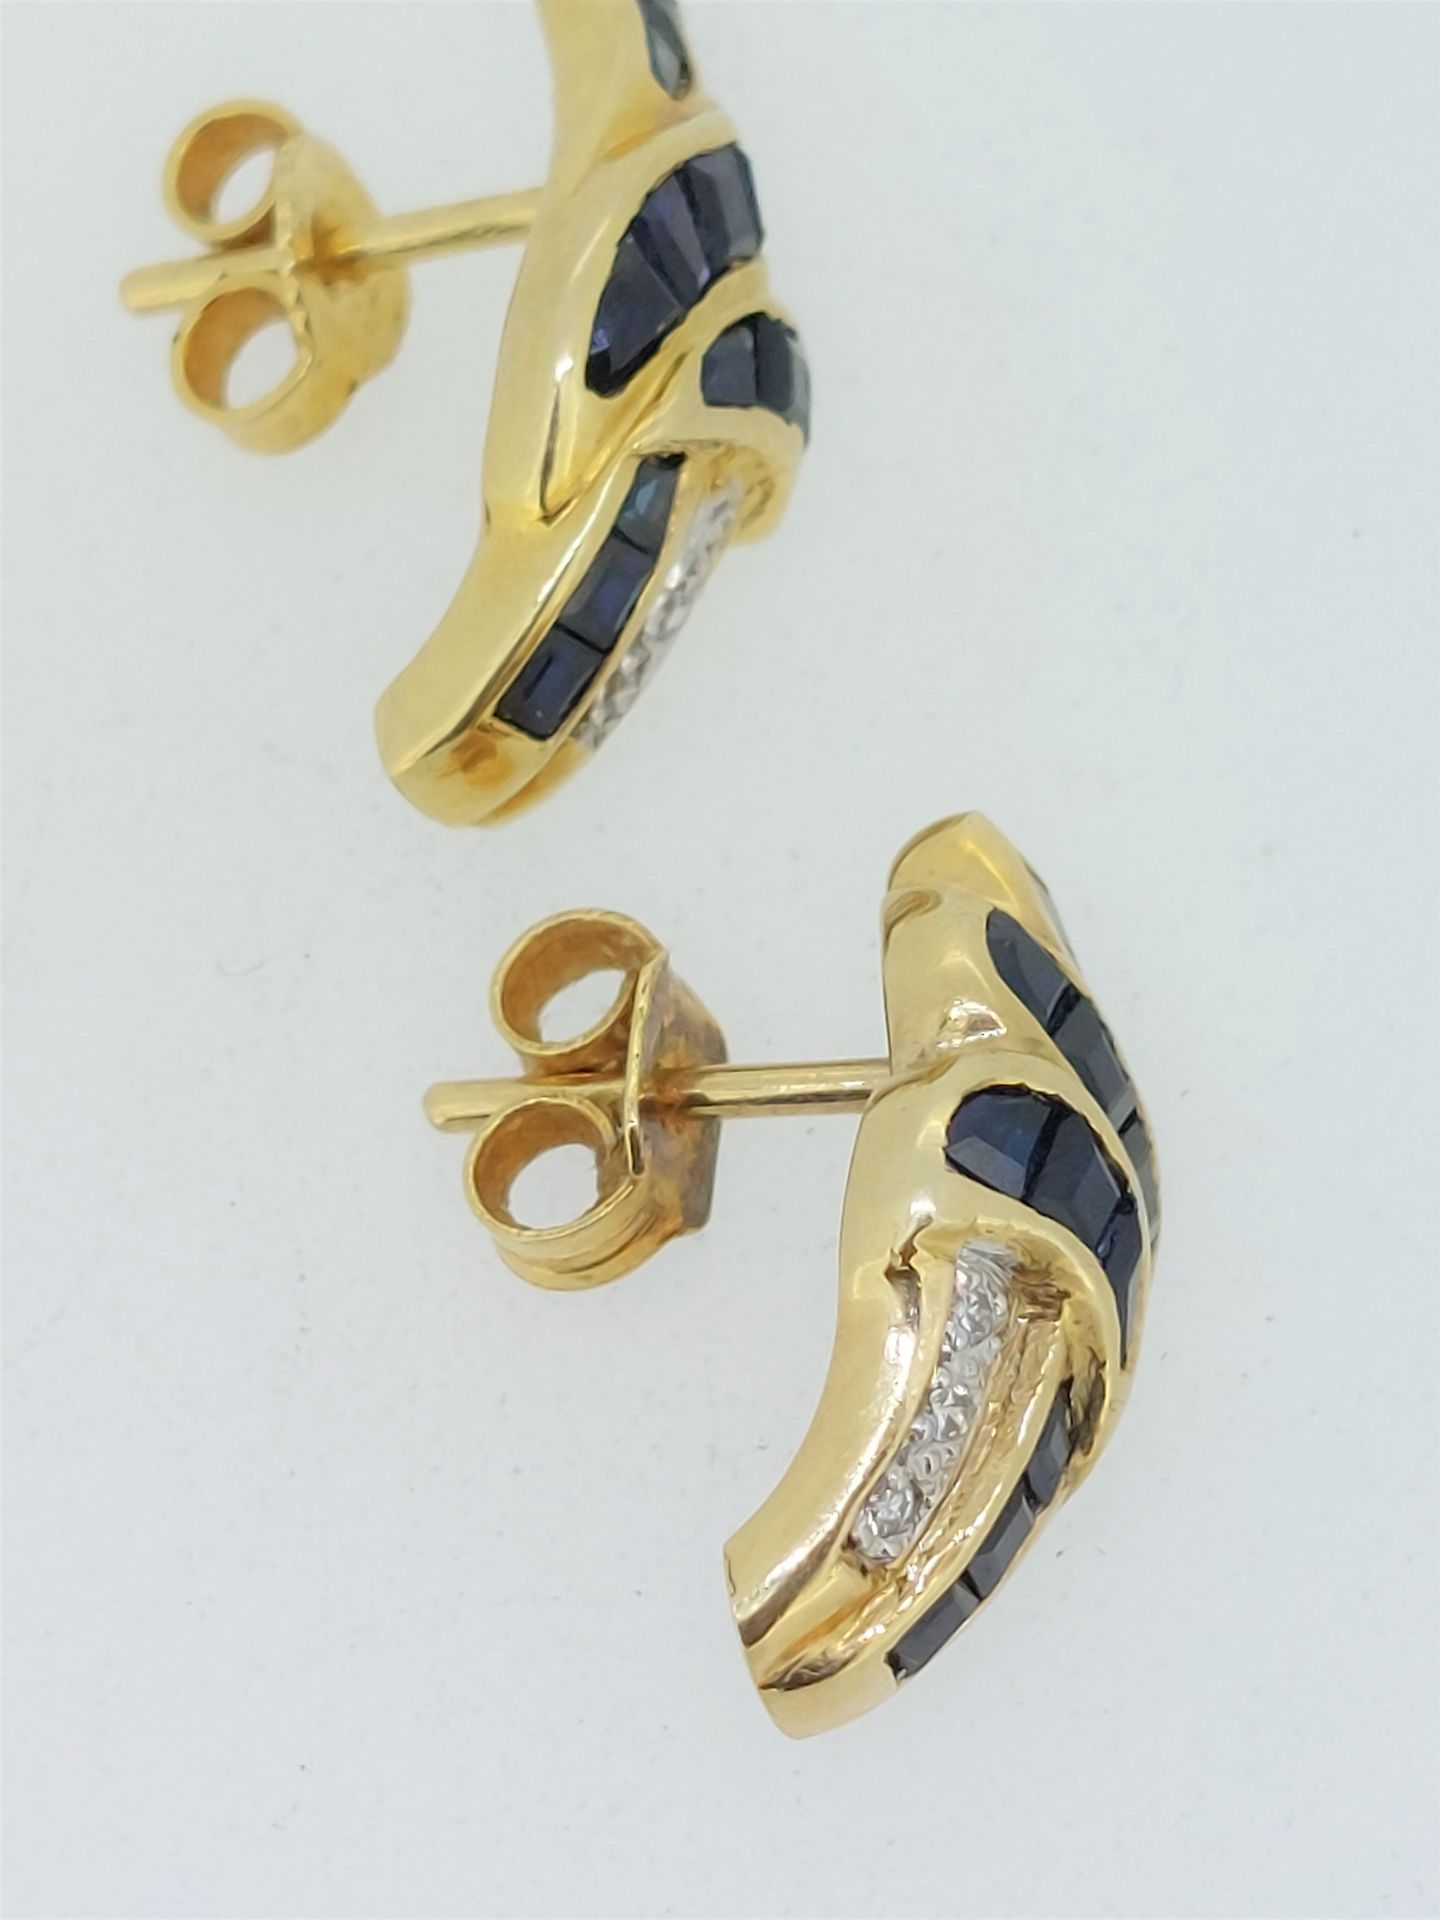 14ct Yellow Gold (585) Sapphire Stud Earrings - Image 2 of 3